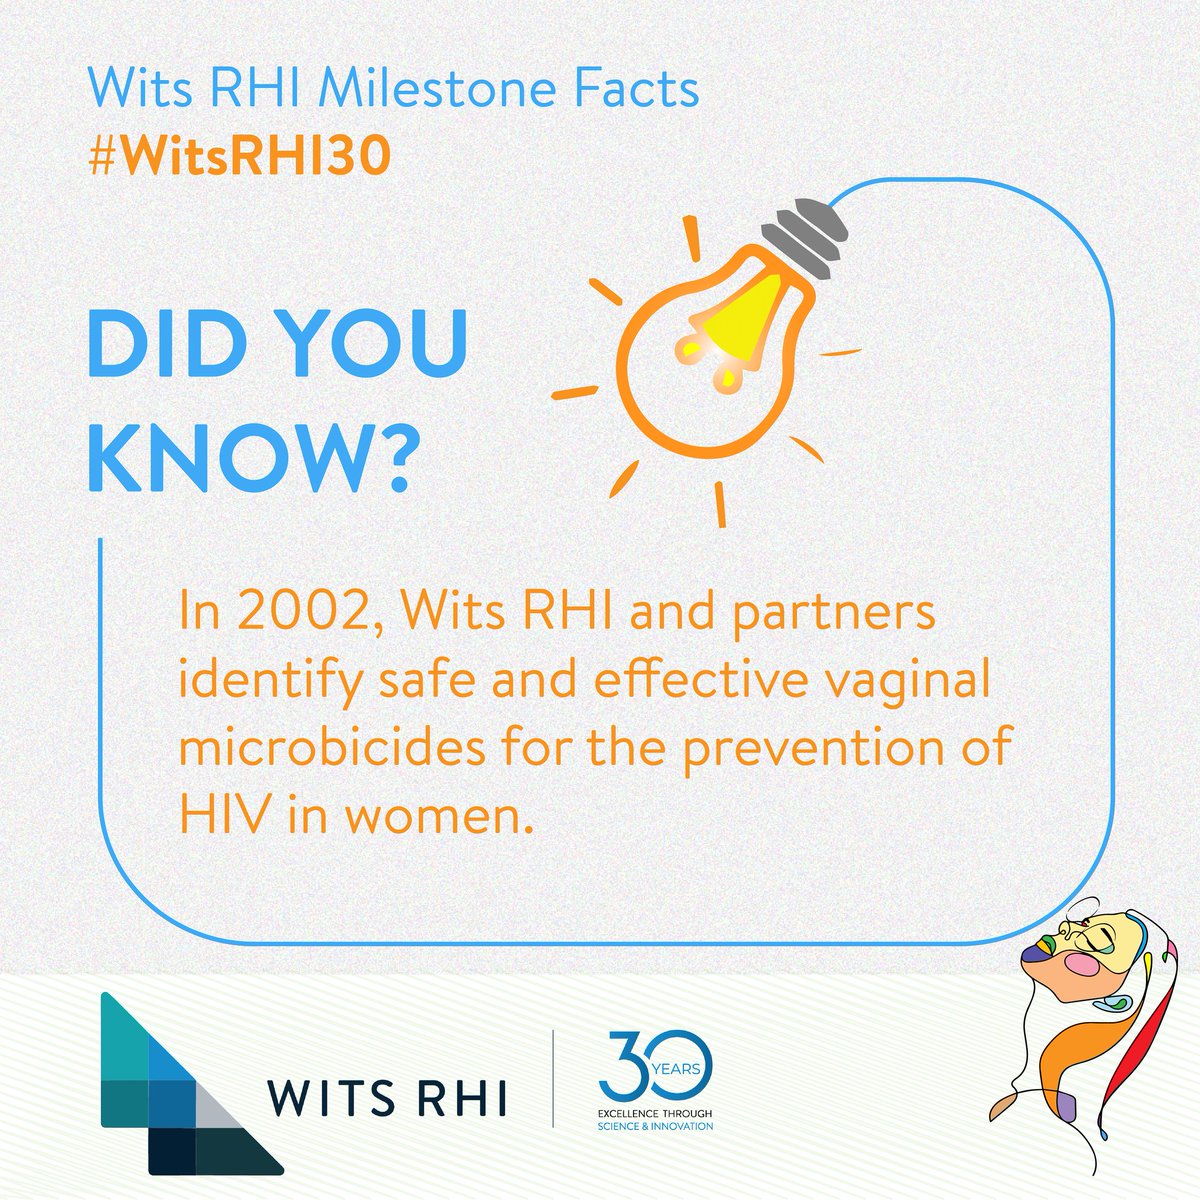 In 2002, Wits RHI & partners discovered safe vaginal microbicides for HIV prevention in women. A monumental step in fighting HIV/AIDS! ‍Let's celebrate milestones & support healthcare progress! 
#HIVPrevention #HealthcareInnovation #WitsRHI #ResearchForGood 🌍🔬